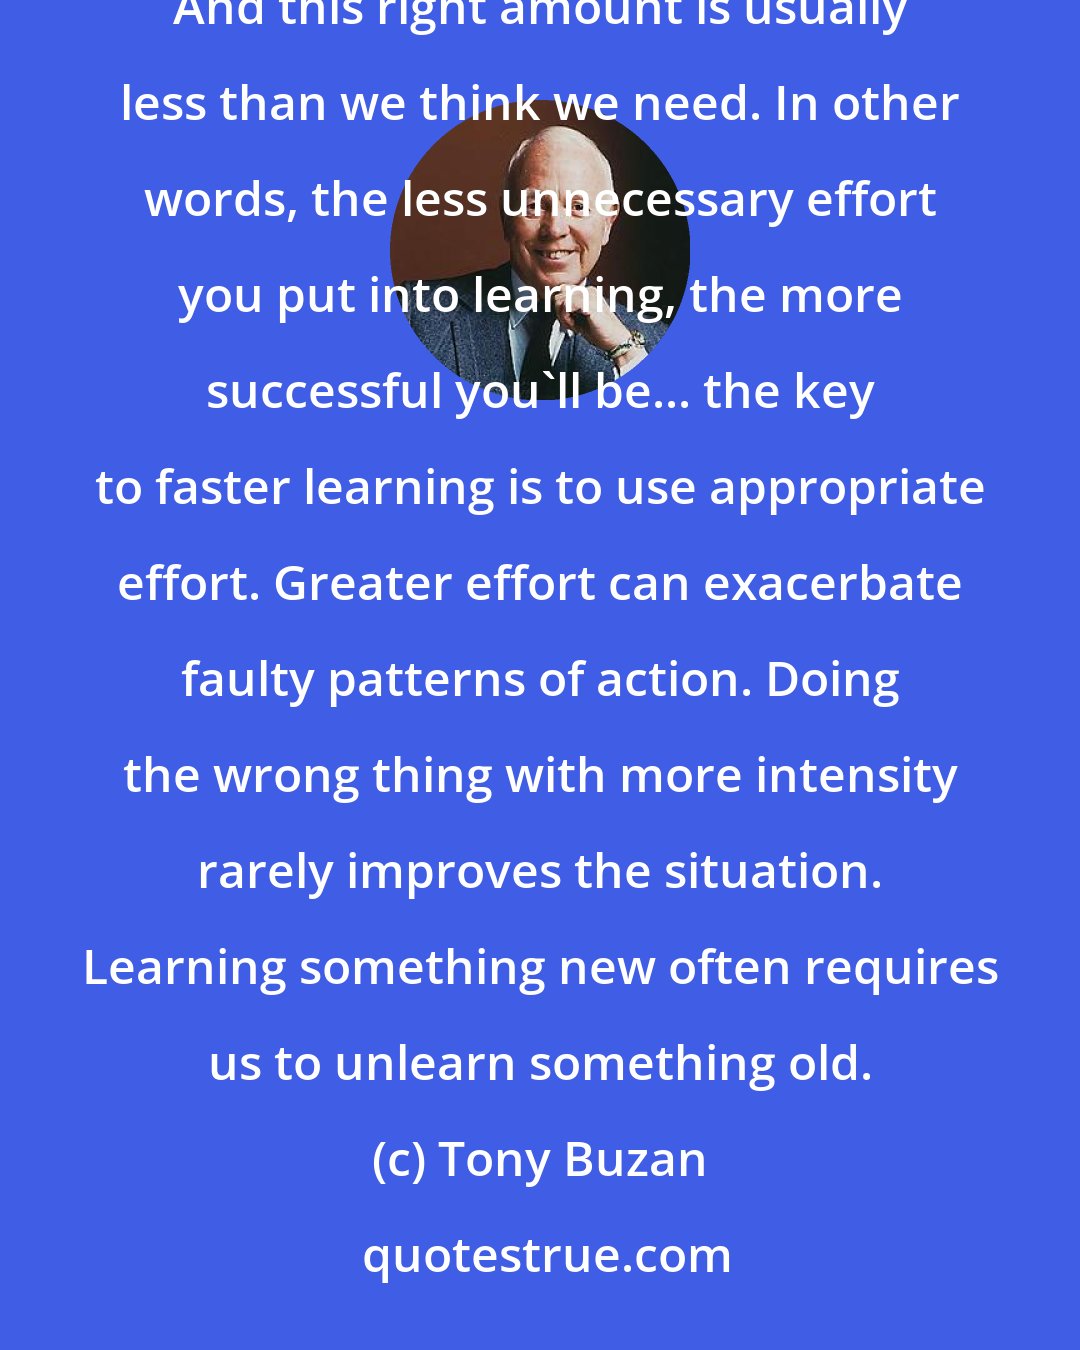 Tony Buzan: The best results are achieved by using the right amount of effort in the right place at the right time. And this right amount is usually less than we think we need. In other words, the less unnecessary effort you put into learning, the more successful you'll be... the key to faster learning is to use appropriate effort. Greater effort can exacerbate faulty patterns of action. Doing the wrong thing with more intensity rarely improves the situation. Learning something new often requires us to unlearn something old.